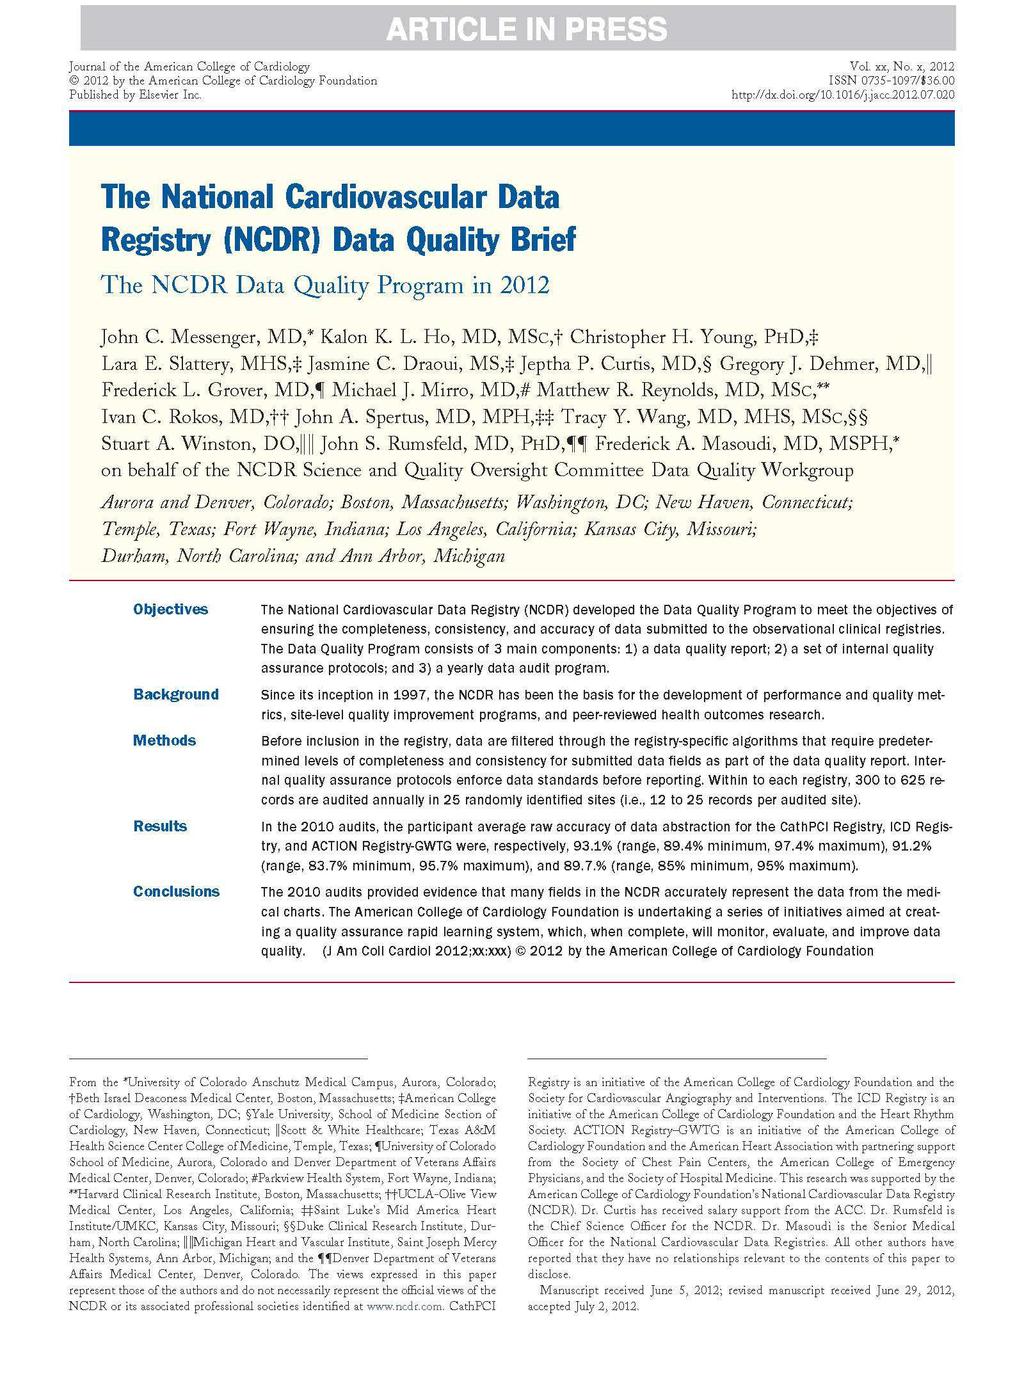 accuracy of data abstraction for the CathPCI, ICD, and ACTION-GWTG registries were,